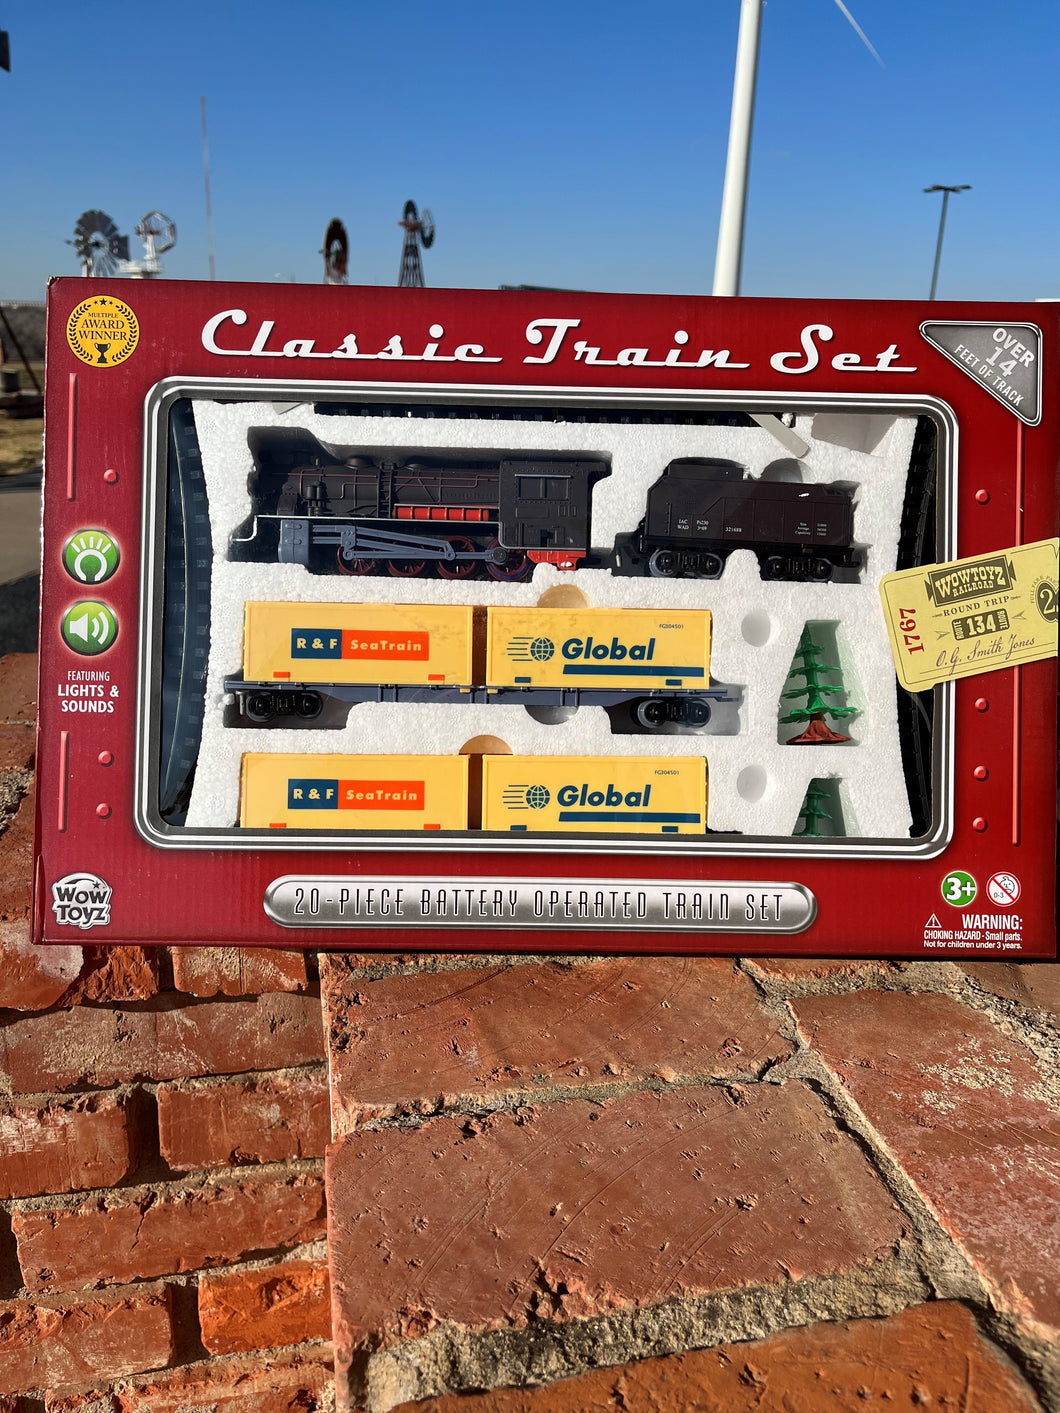 20 Piece Container Car Battery Operated Train Set